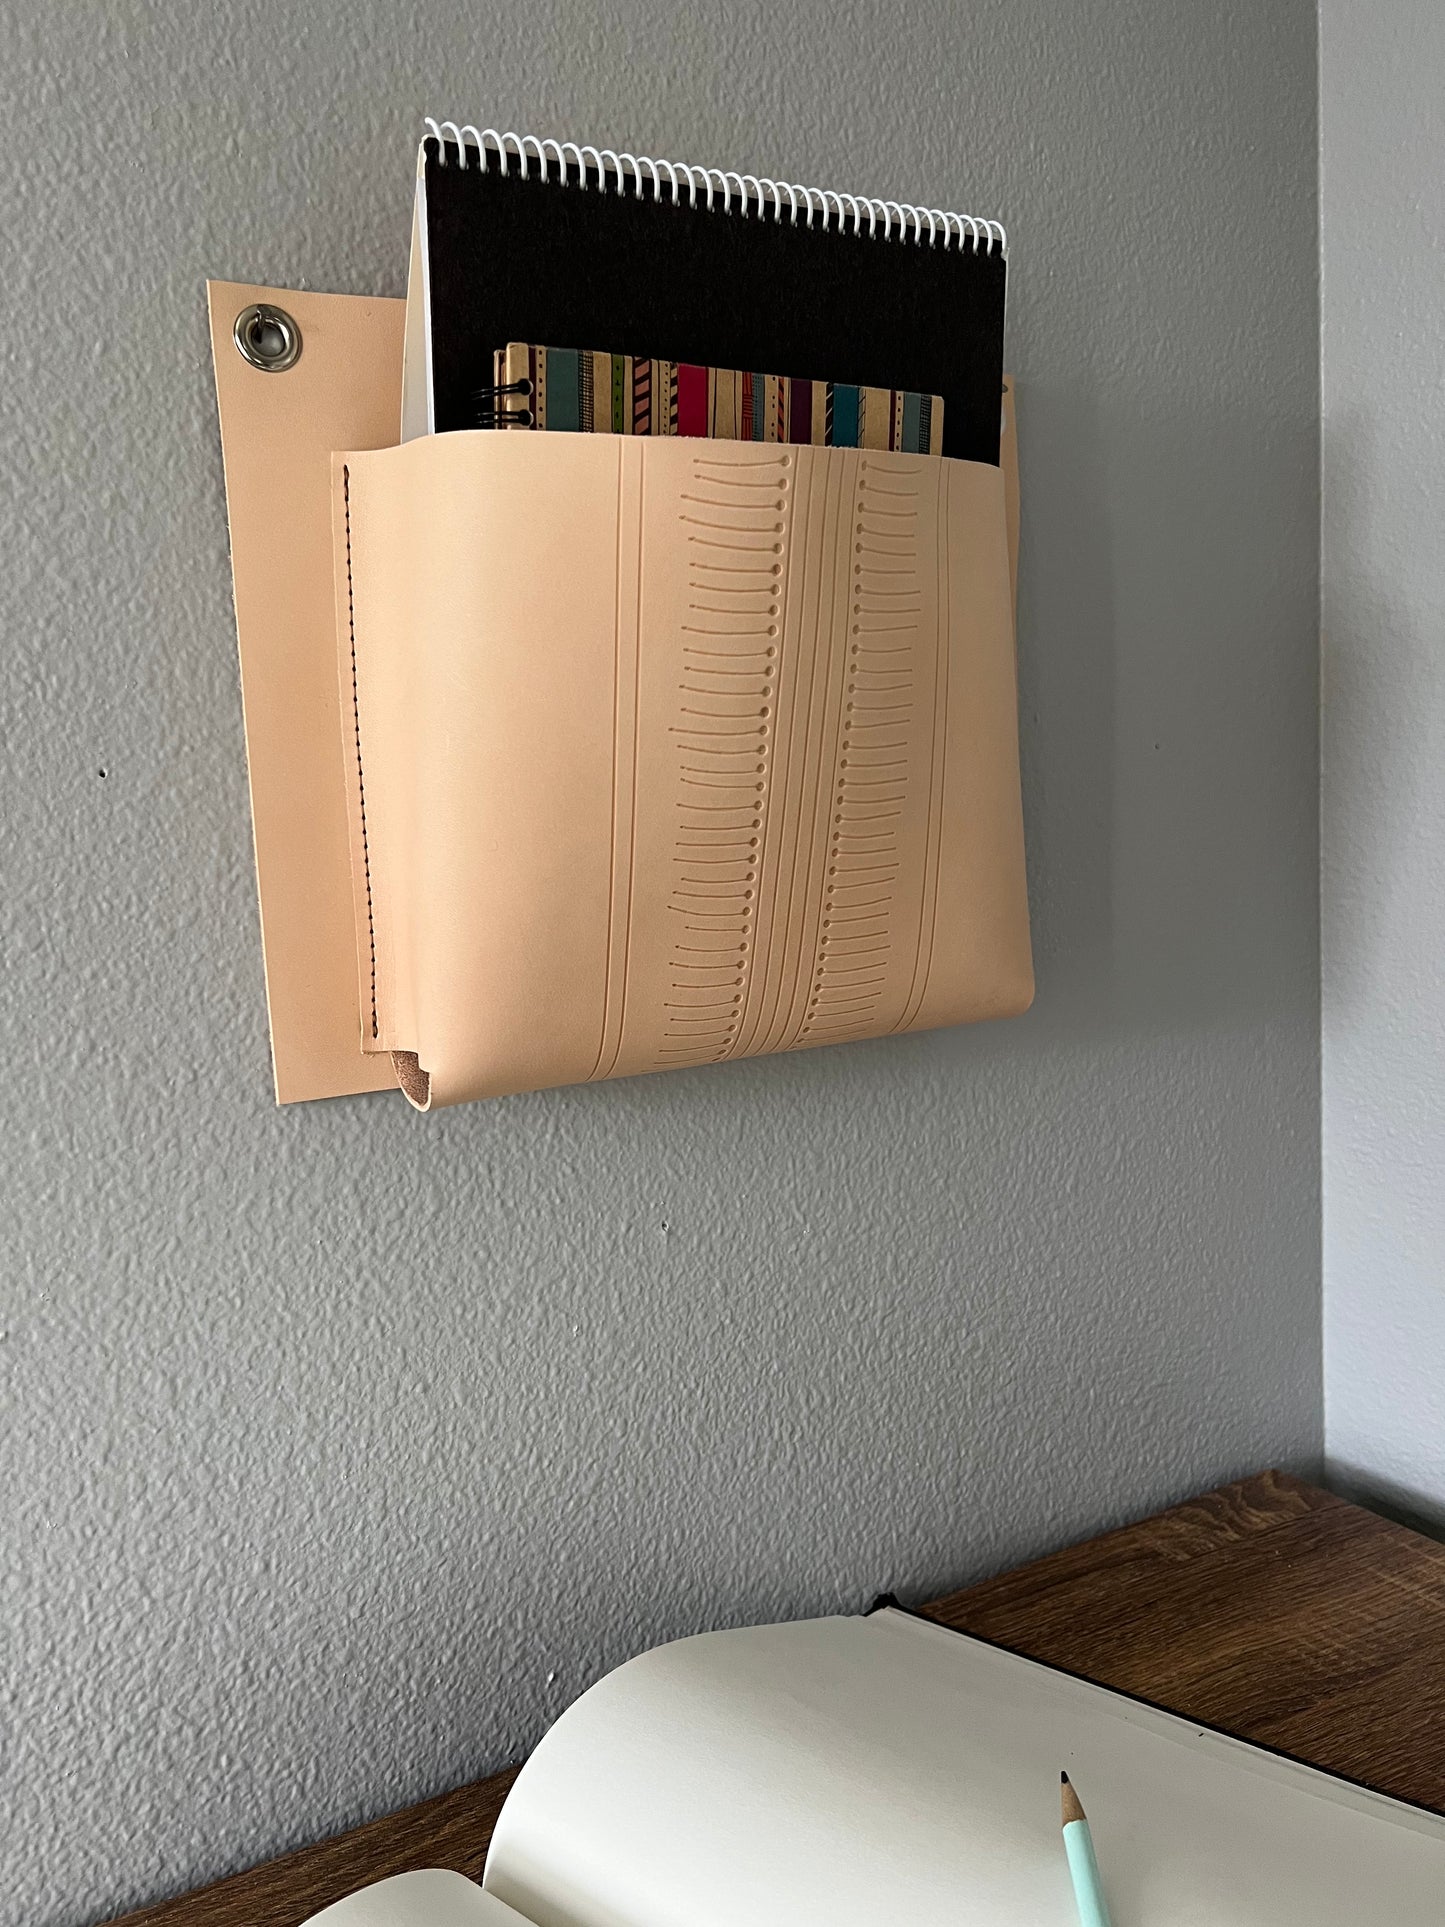 Extra Large Patterned Leather Wall Pocket | Hanging Leather Organizer | Mail Organizer | Leather Home Gift